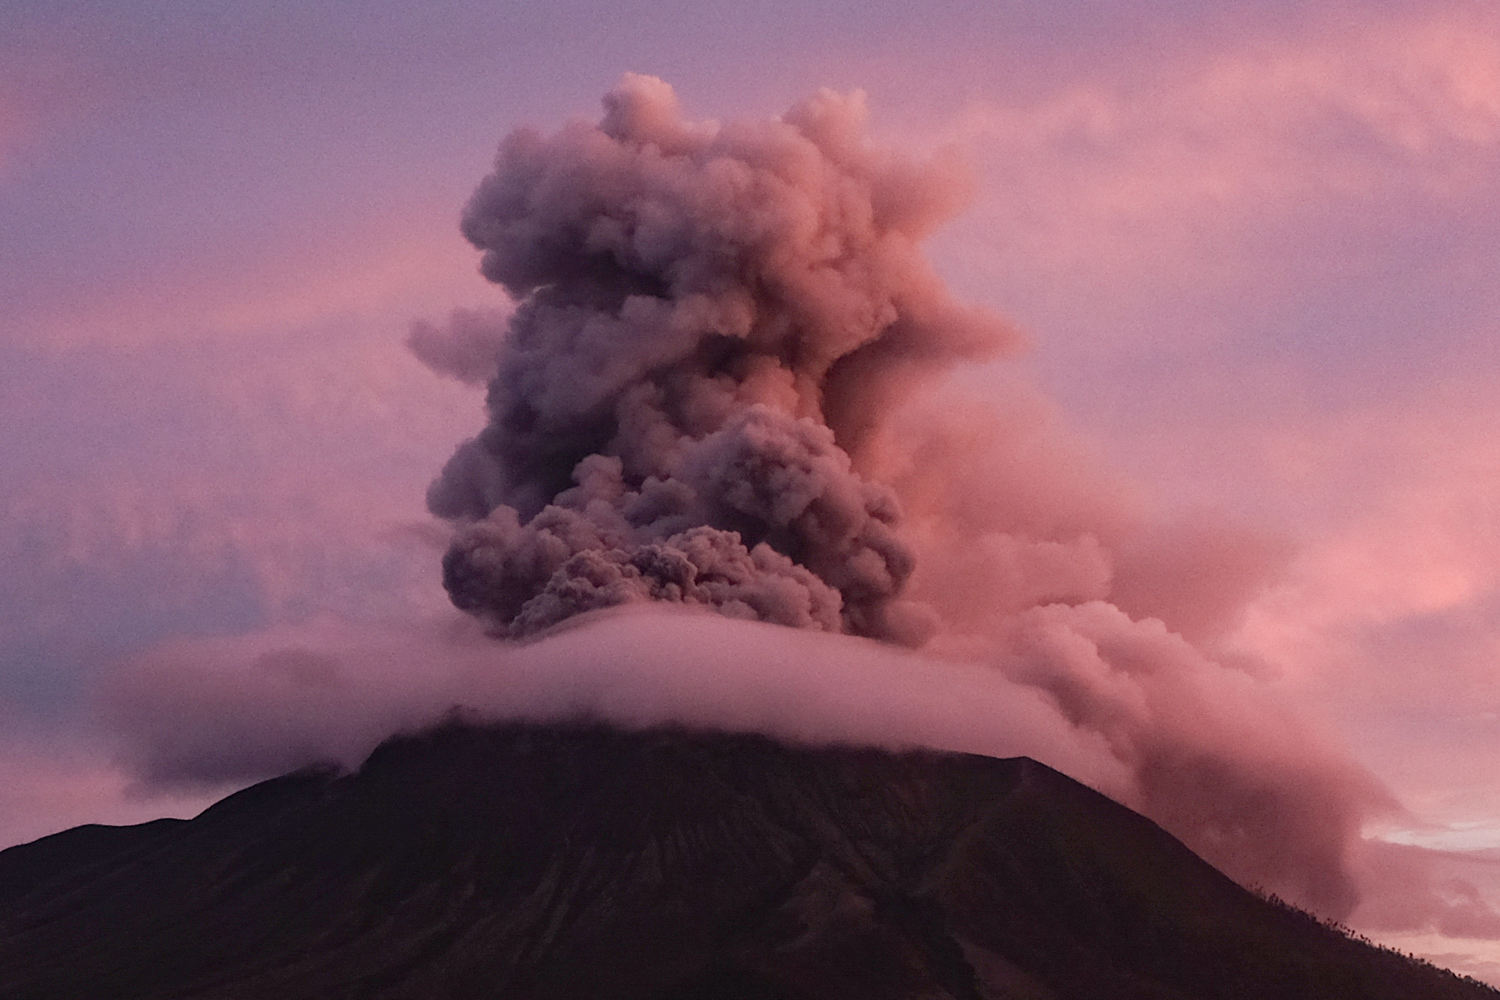 More than 2,100 people are evacuated as an Indonesian volcano spews clouds of ash